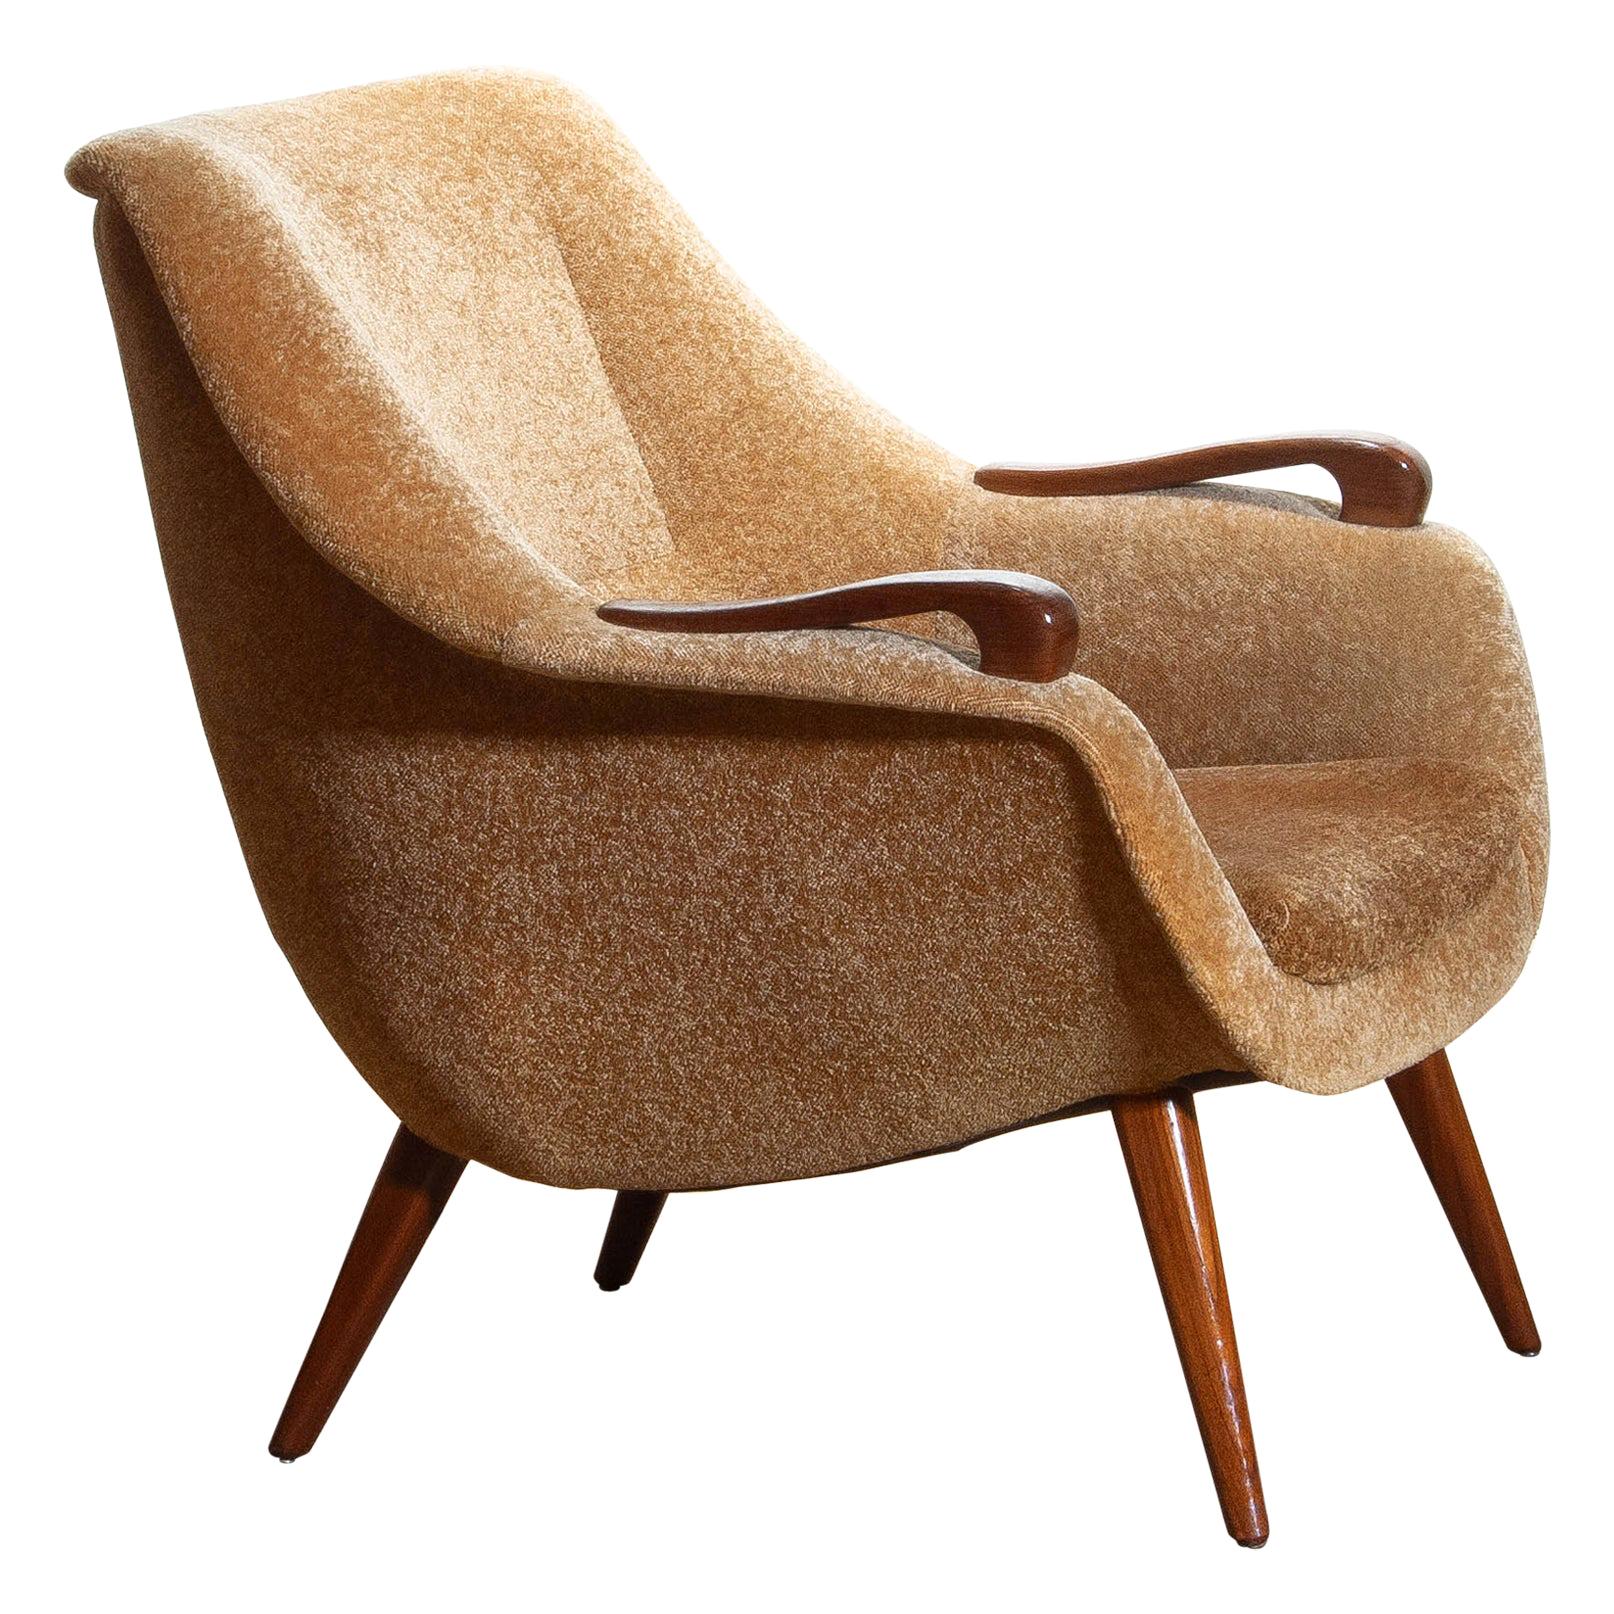 Extremely rare lounge / easy chair from Denmark in camel chenille in combination with teak from the 1950s.
The overall condition is good.